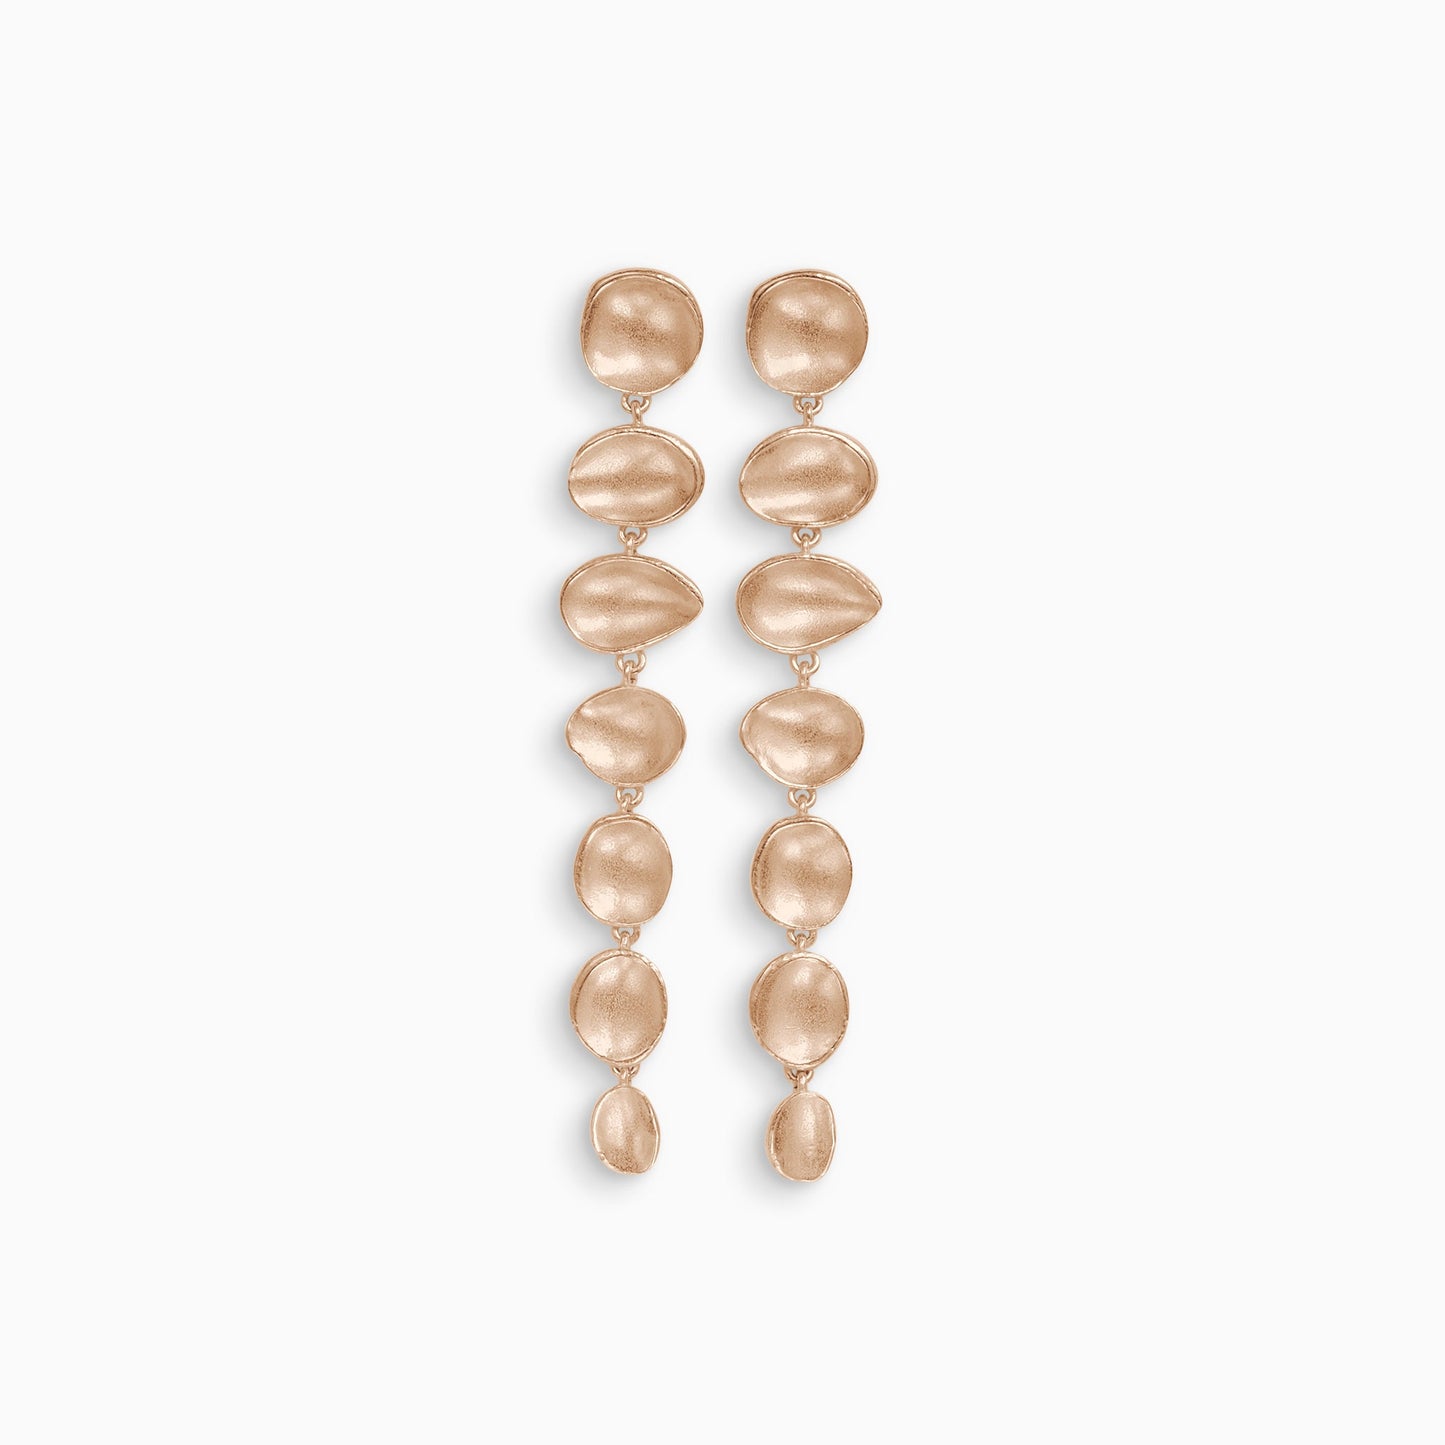 A pair of 18ct Fairtrade rose gold drop earrings. A line of 7 articulating concave discs of various organic shapes and sizes with a stud ear fastening on the top disc. Satin finish. 70mm length, 10mm width.